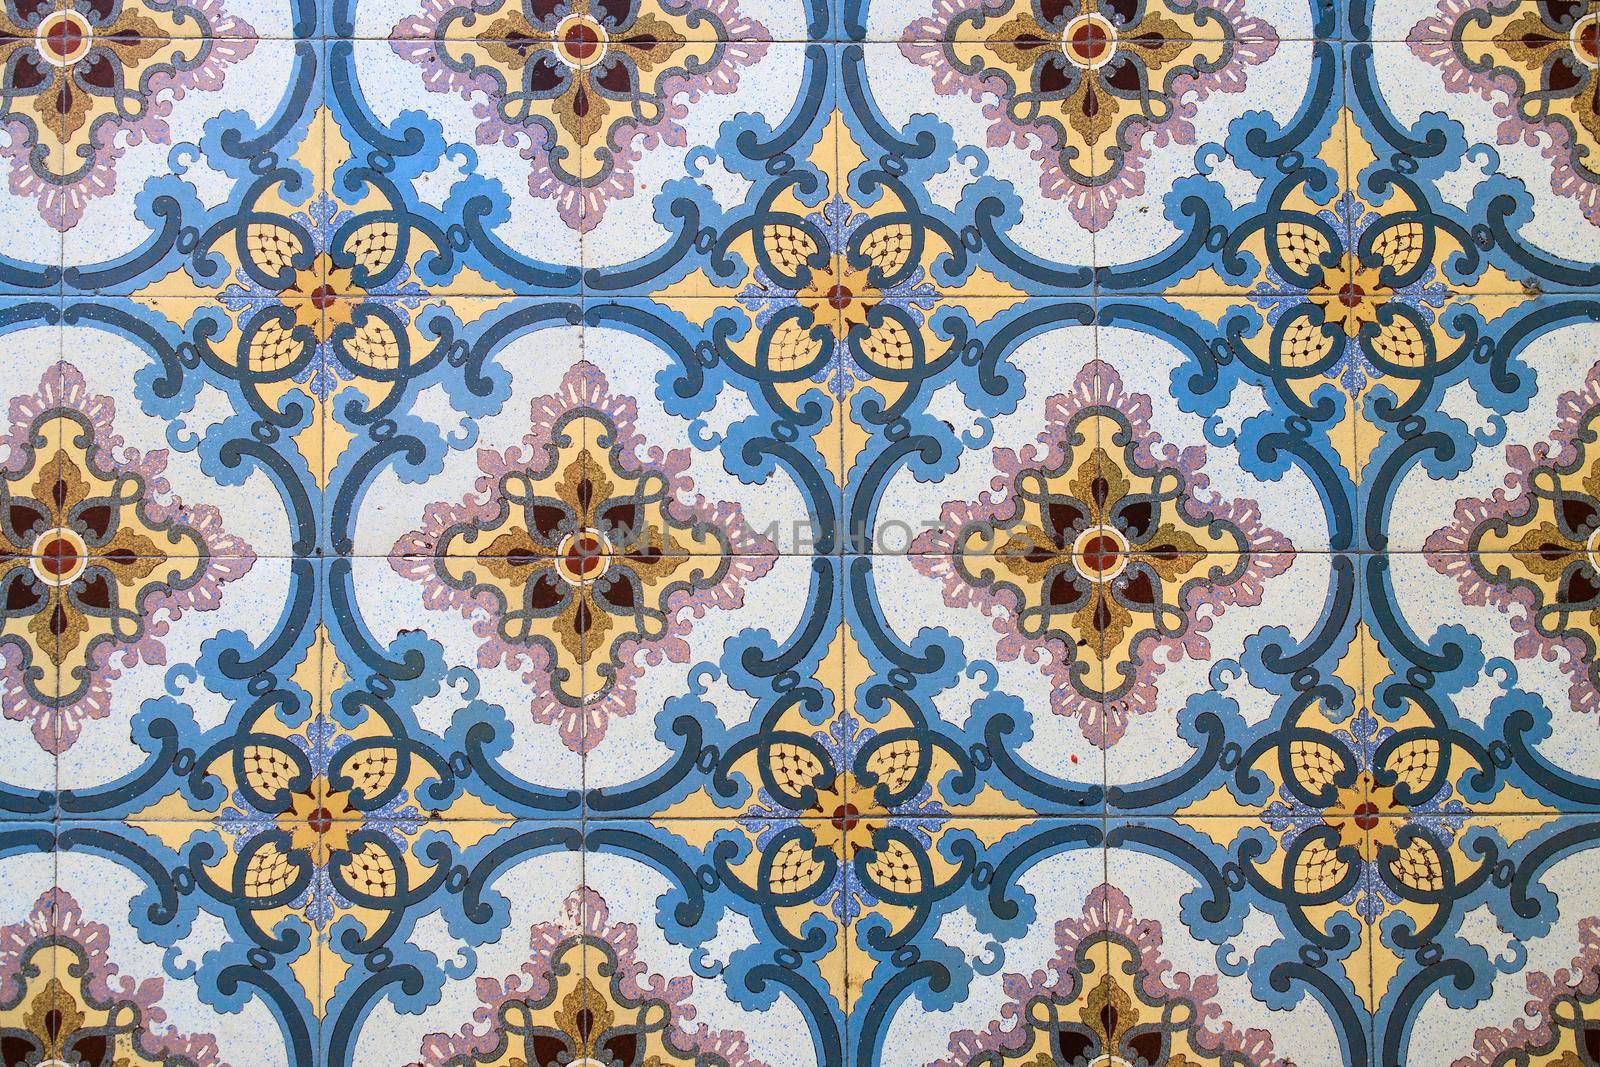 Samples of the famous Metlakh tiles, popular more than a hundred years ago by elenarostunova